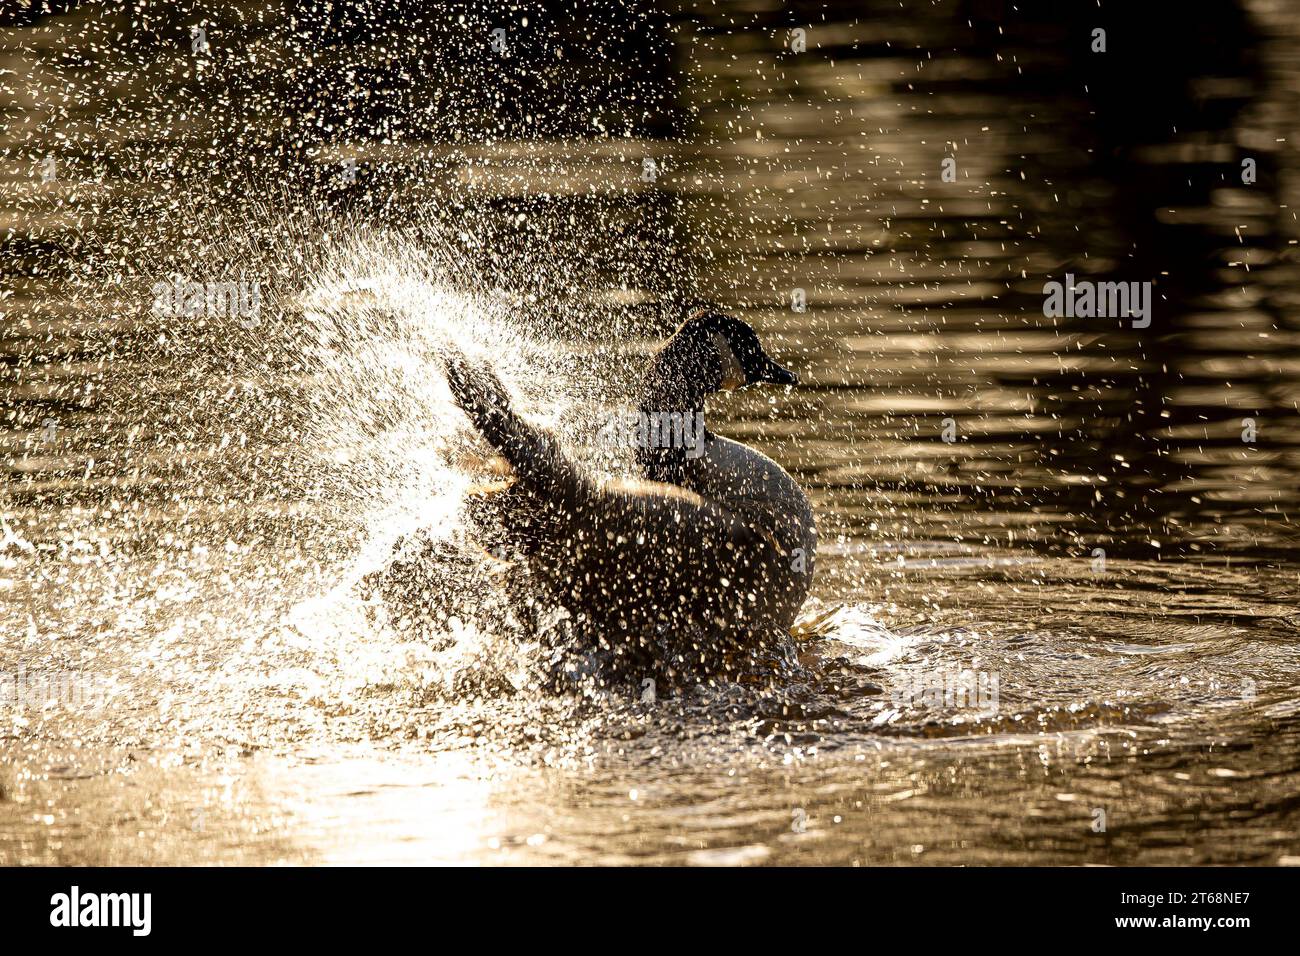 Kidderminster, UK. 9th November, 2023. UK weather: the local wildlife enjoys glorious sunny sunshine today, quite a contrast to the past wet gloomy week. A lone Canada goose splashes as it preens in water lit by the morning sunshine. Credit: Lee Hudson/Alamy Live News Stock Photo